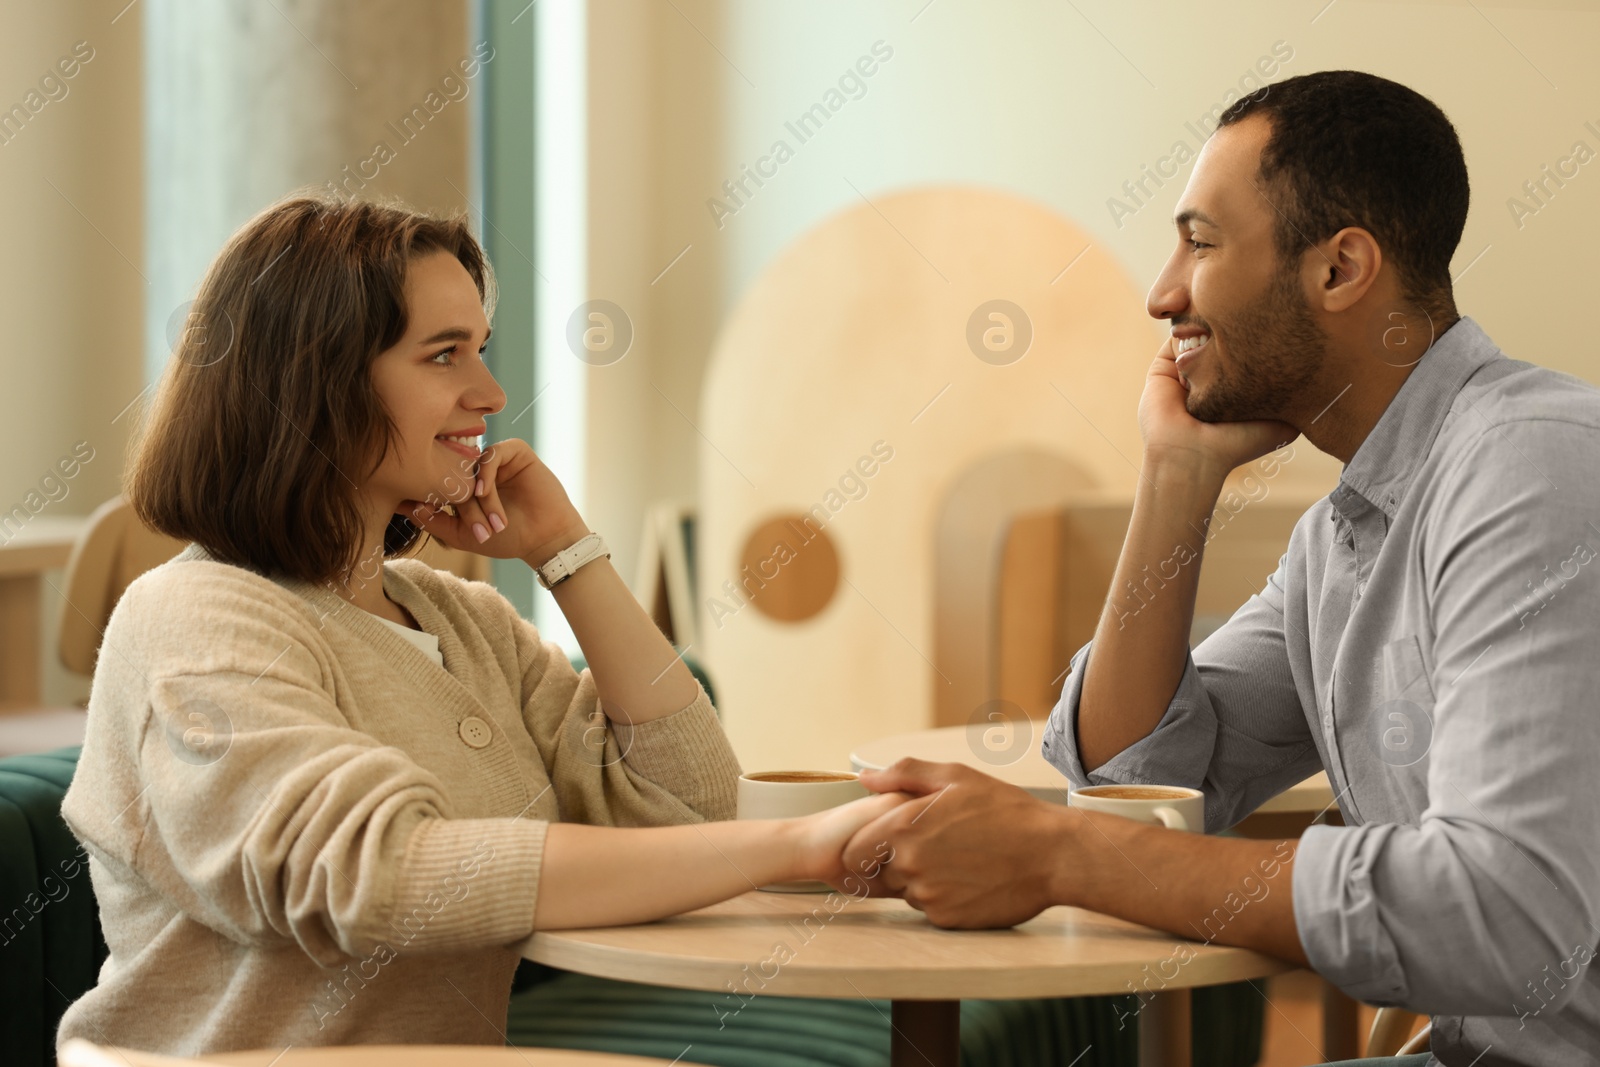 Photo of Romantic date. Happy couple spending time together in cafe